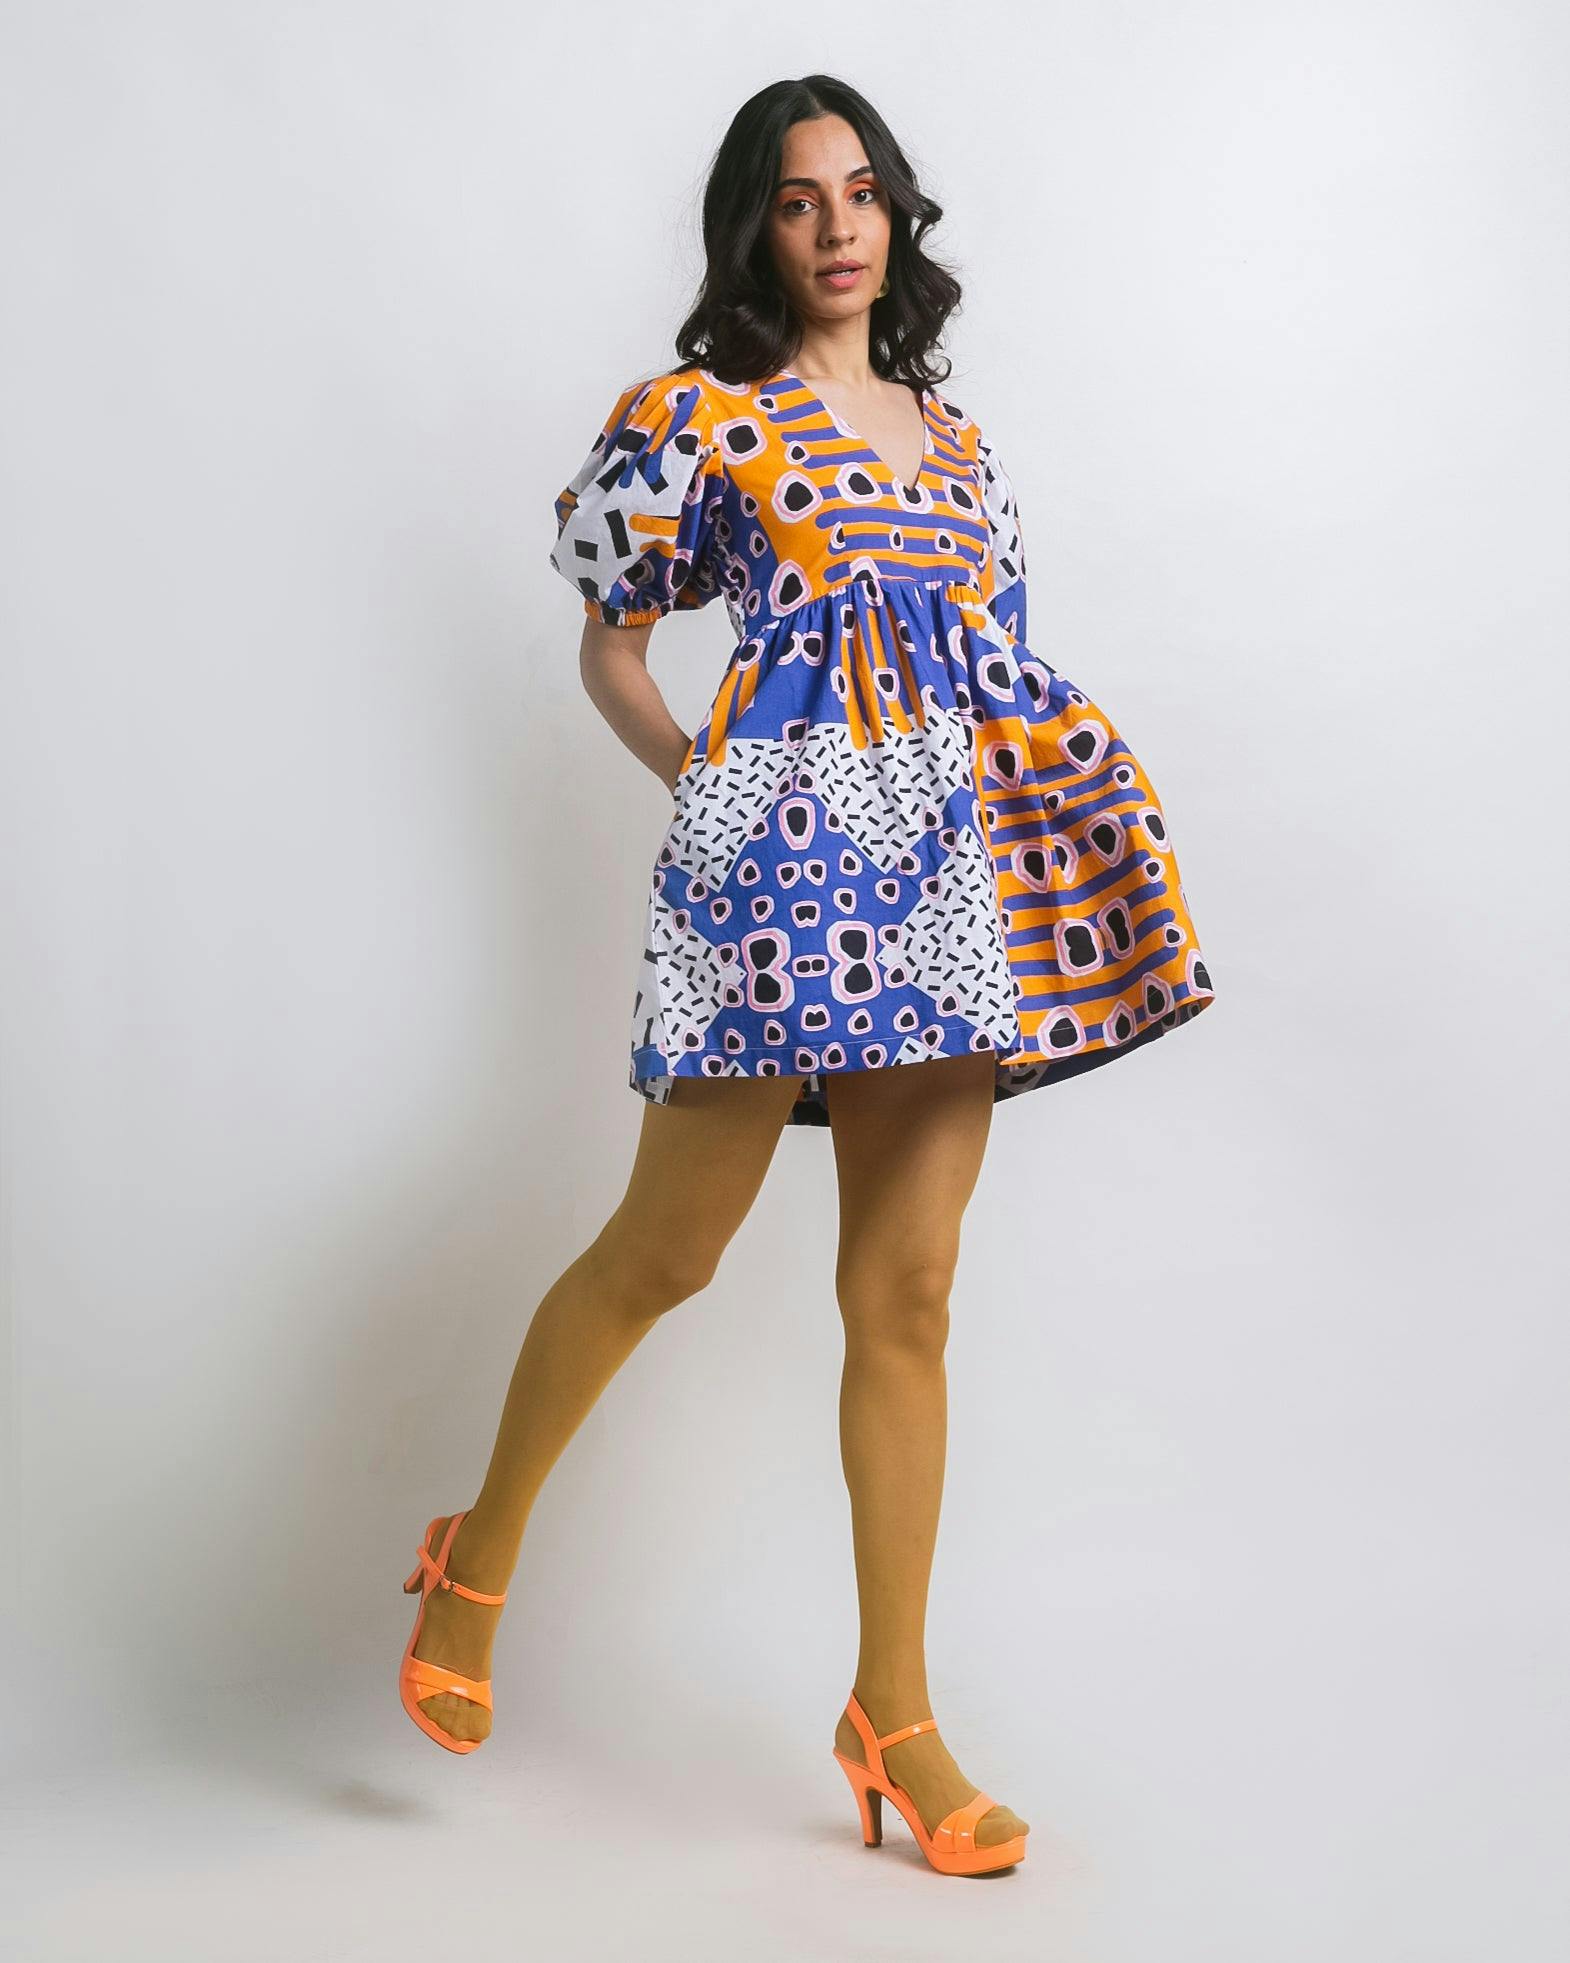 JELLY BELLY DRESS, a product by Sazo